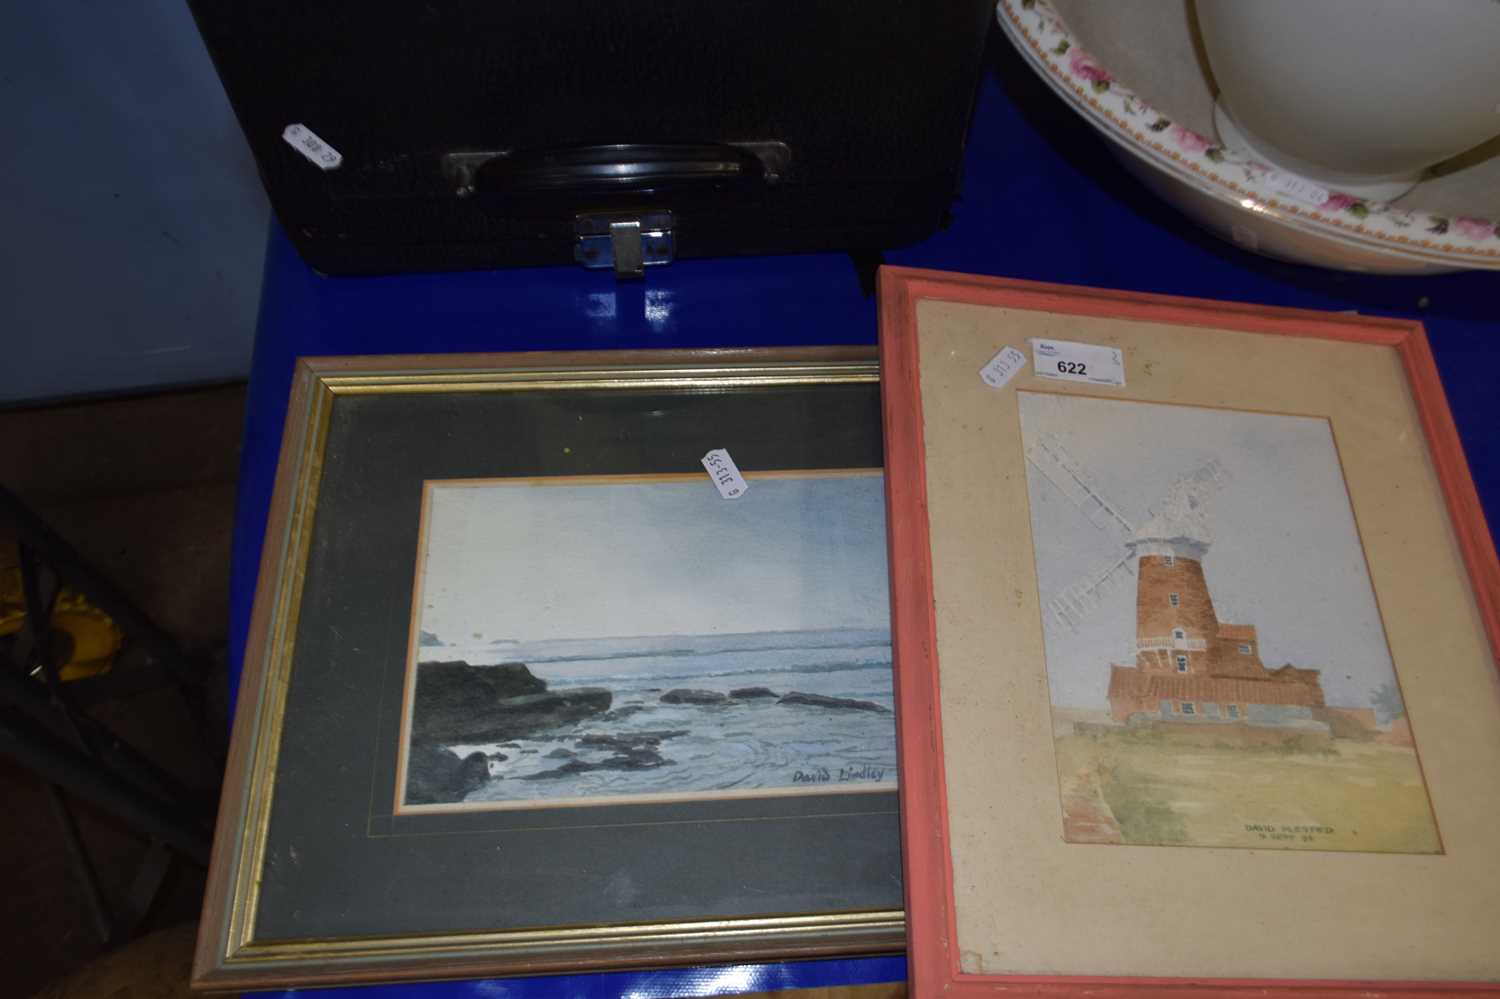 Windmill by David Plested, 9th Sept 84, watercolour, framed and glazed together with a seascape by